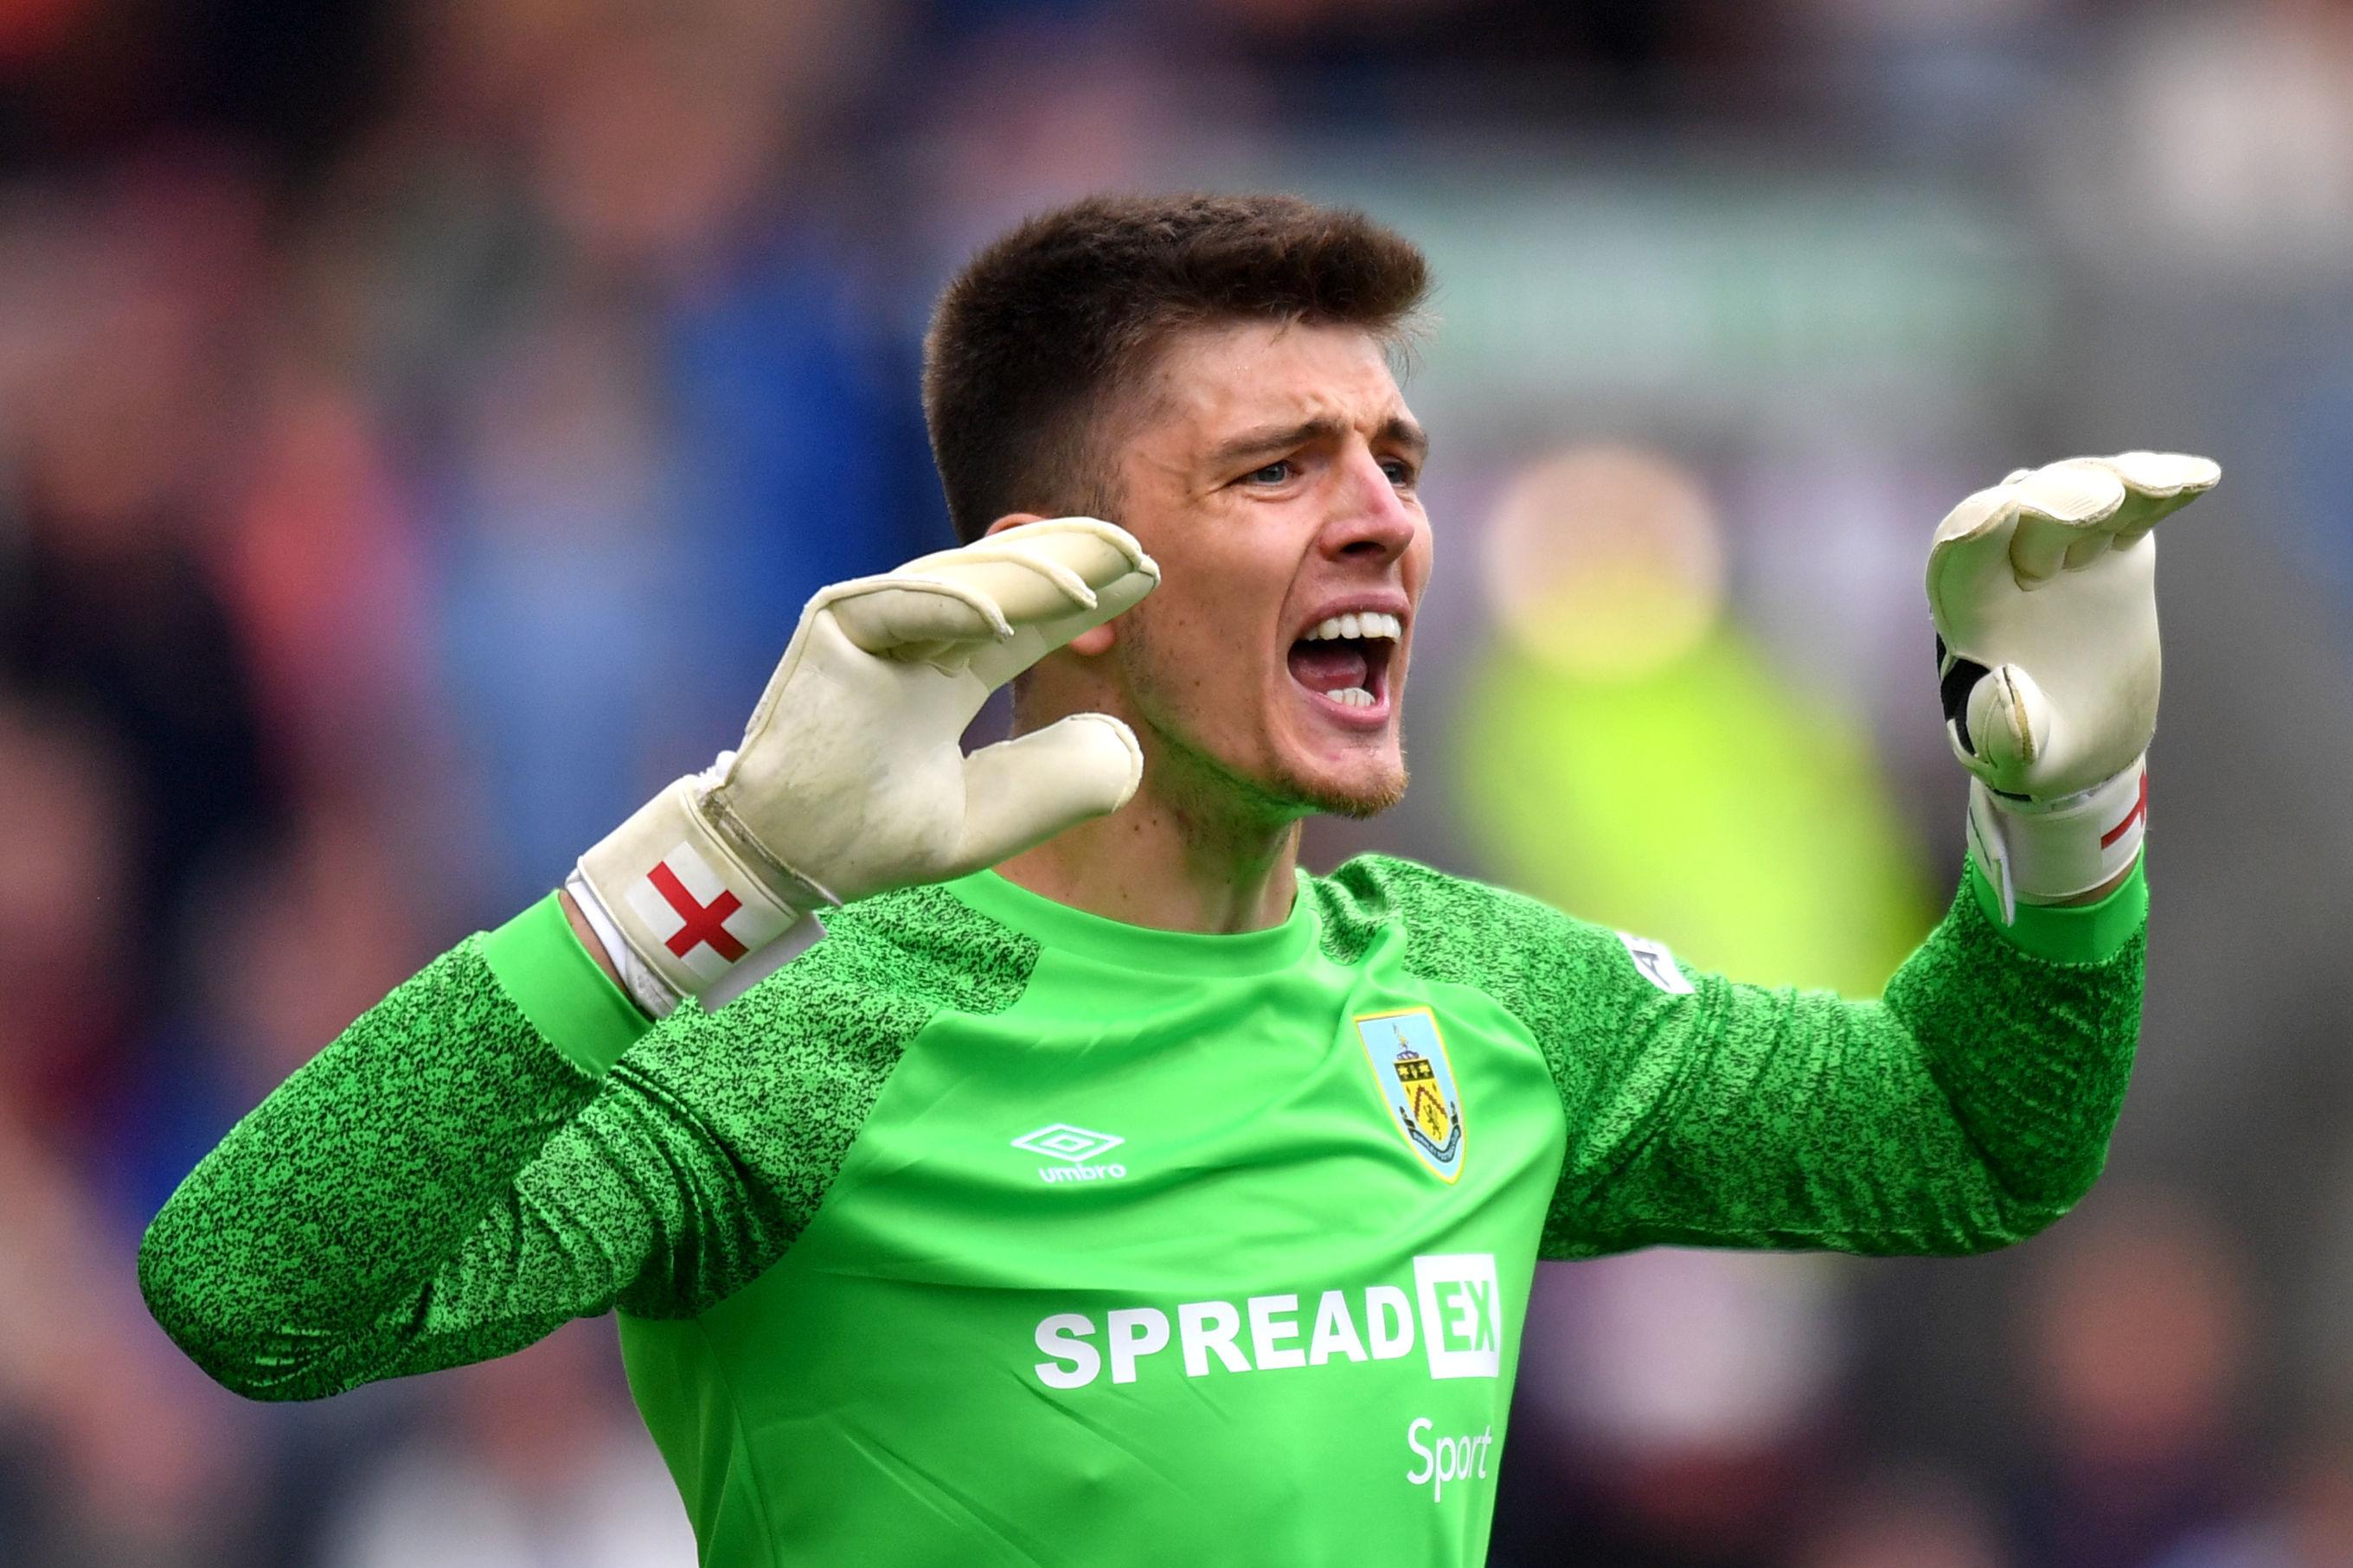 Goalkeeper Nick Pope joins Newcastle for £12m